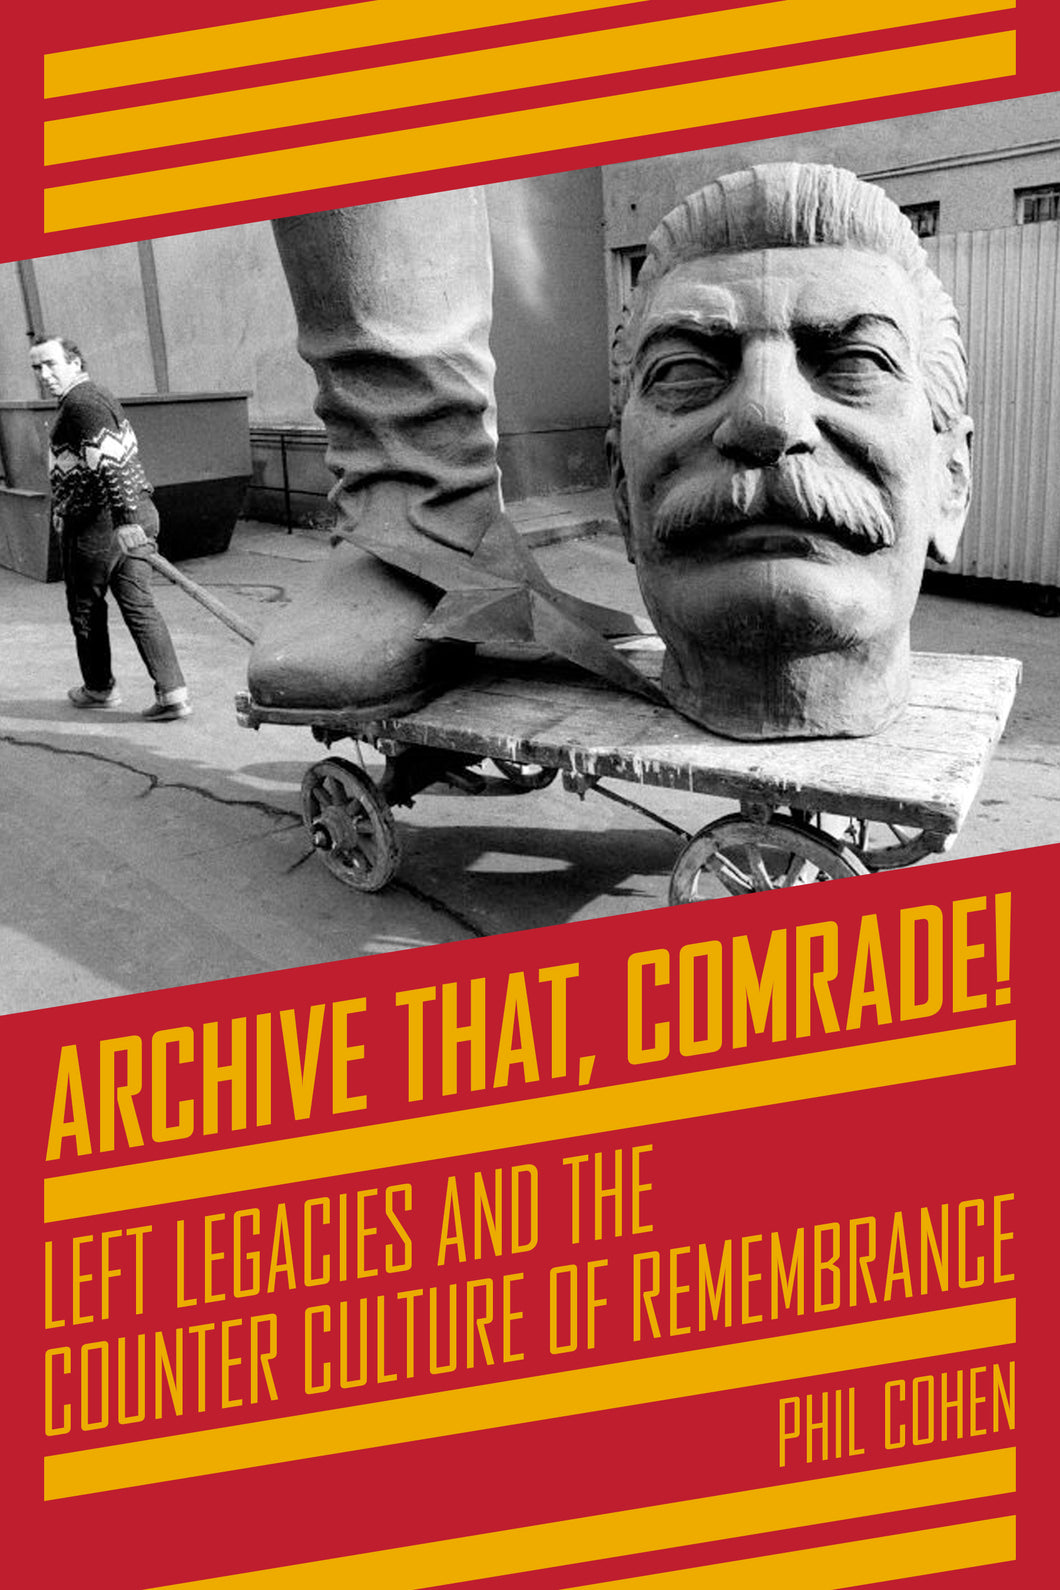 Archive That, Comrade! - Left Legacies and the Counter Culture of Remembrance